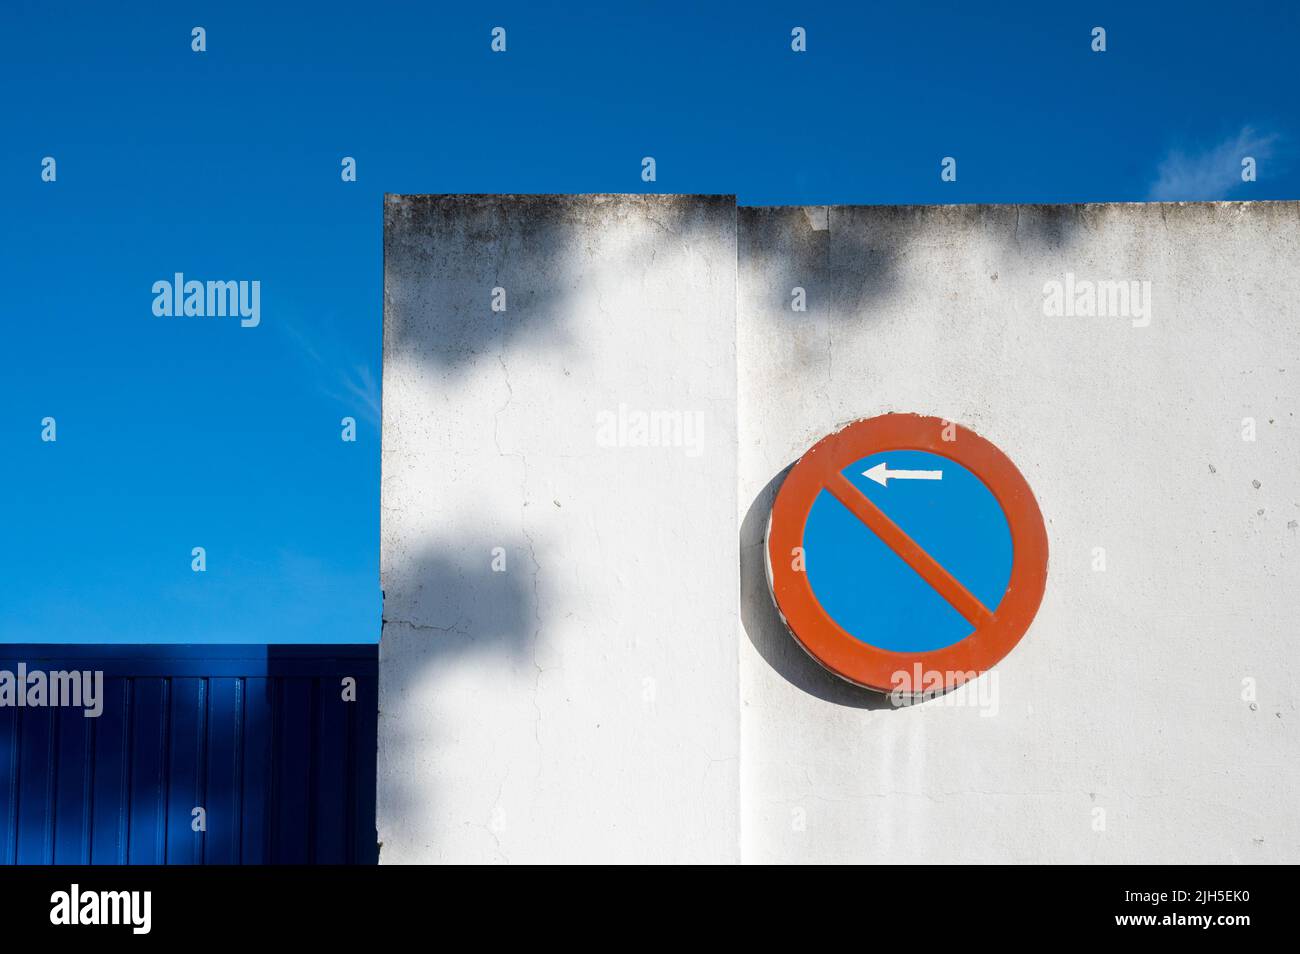 A red and blue no parking sign on a white wall in Spain with vibrant blue and red colour Stock Photo